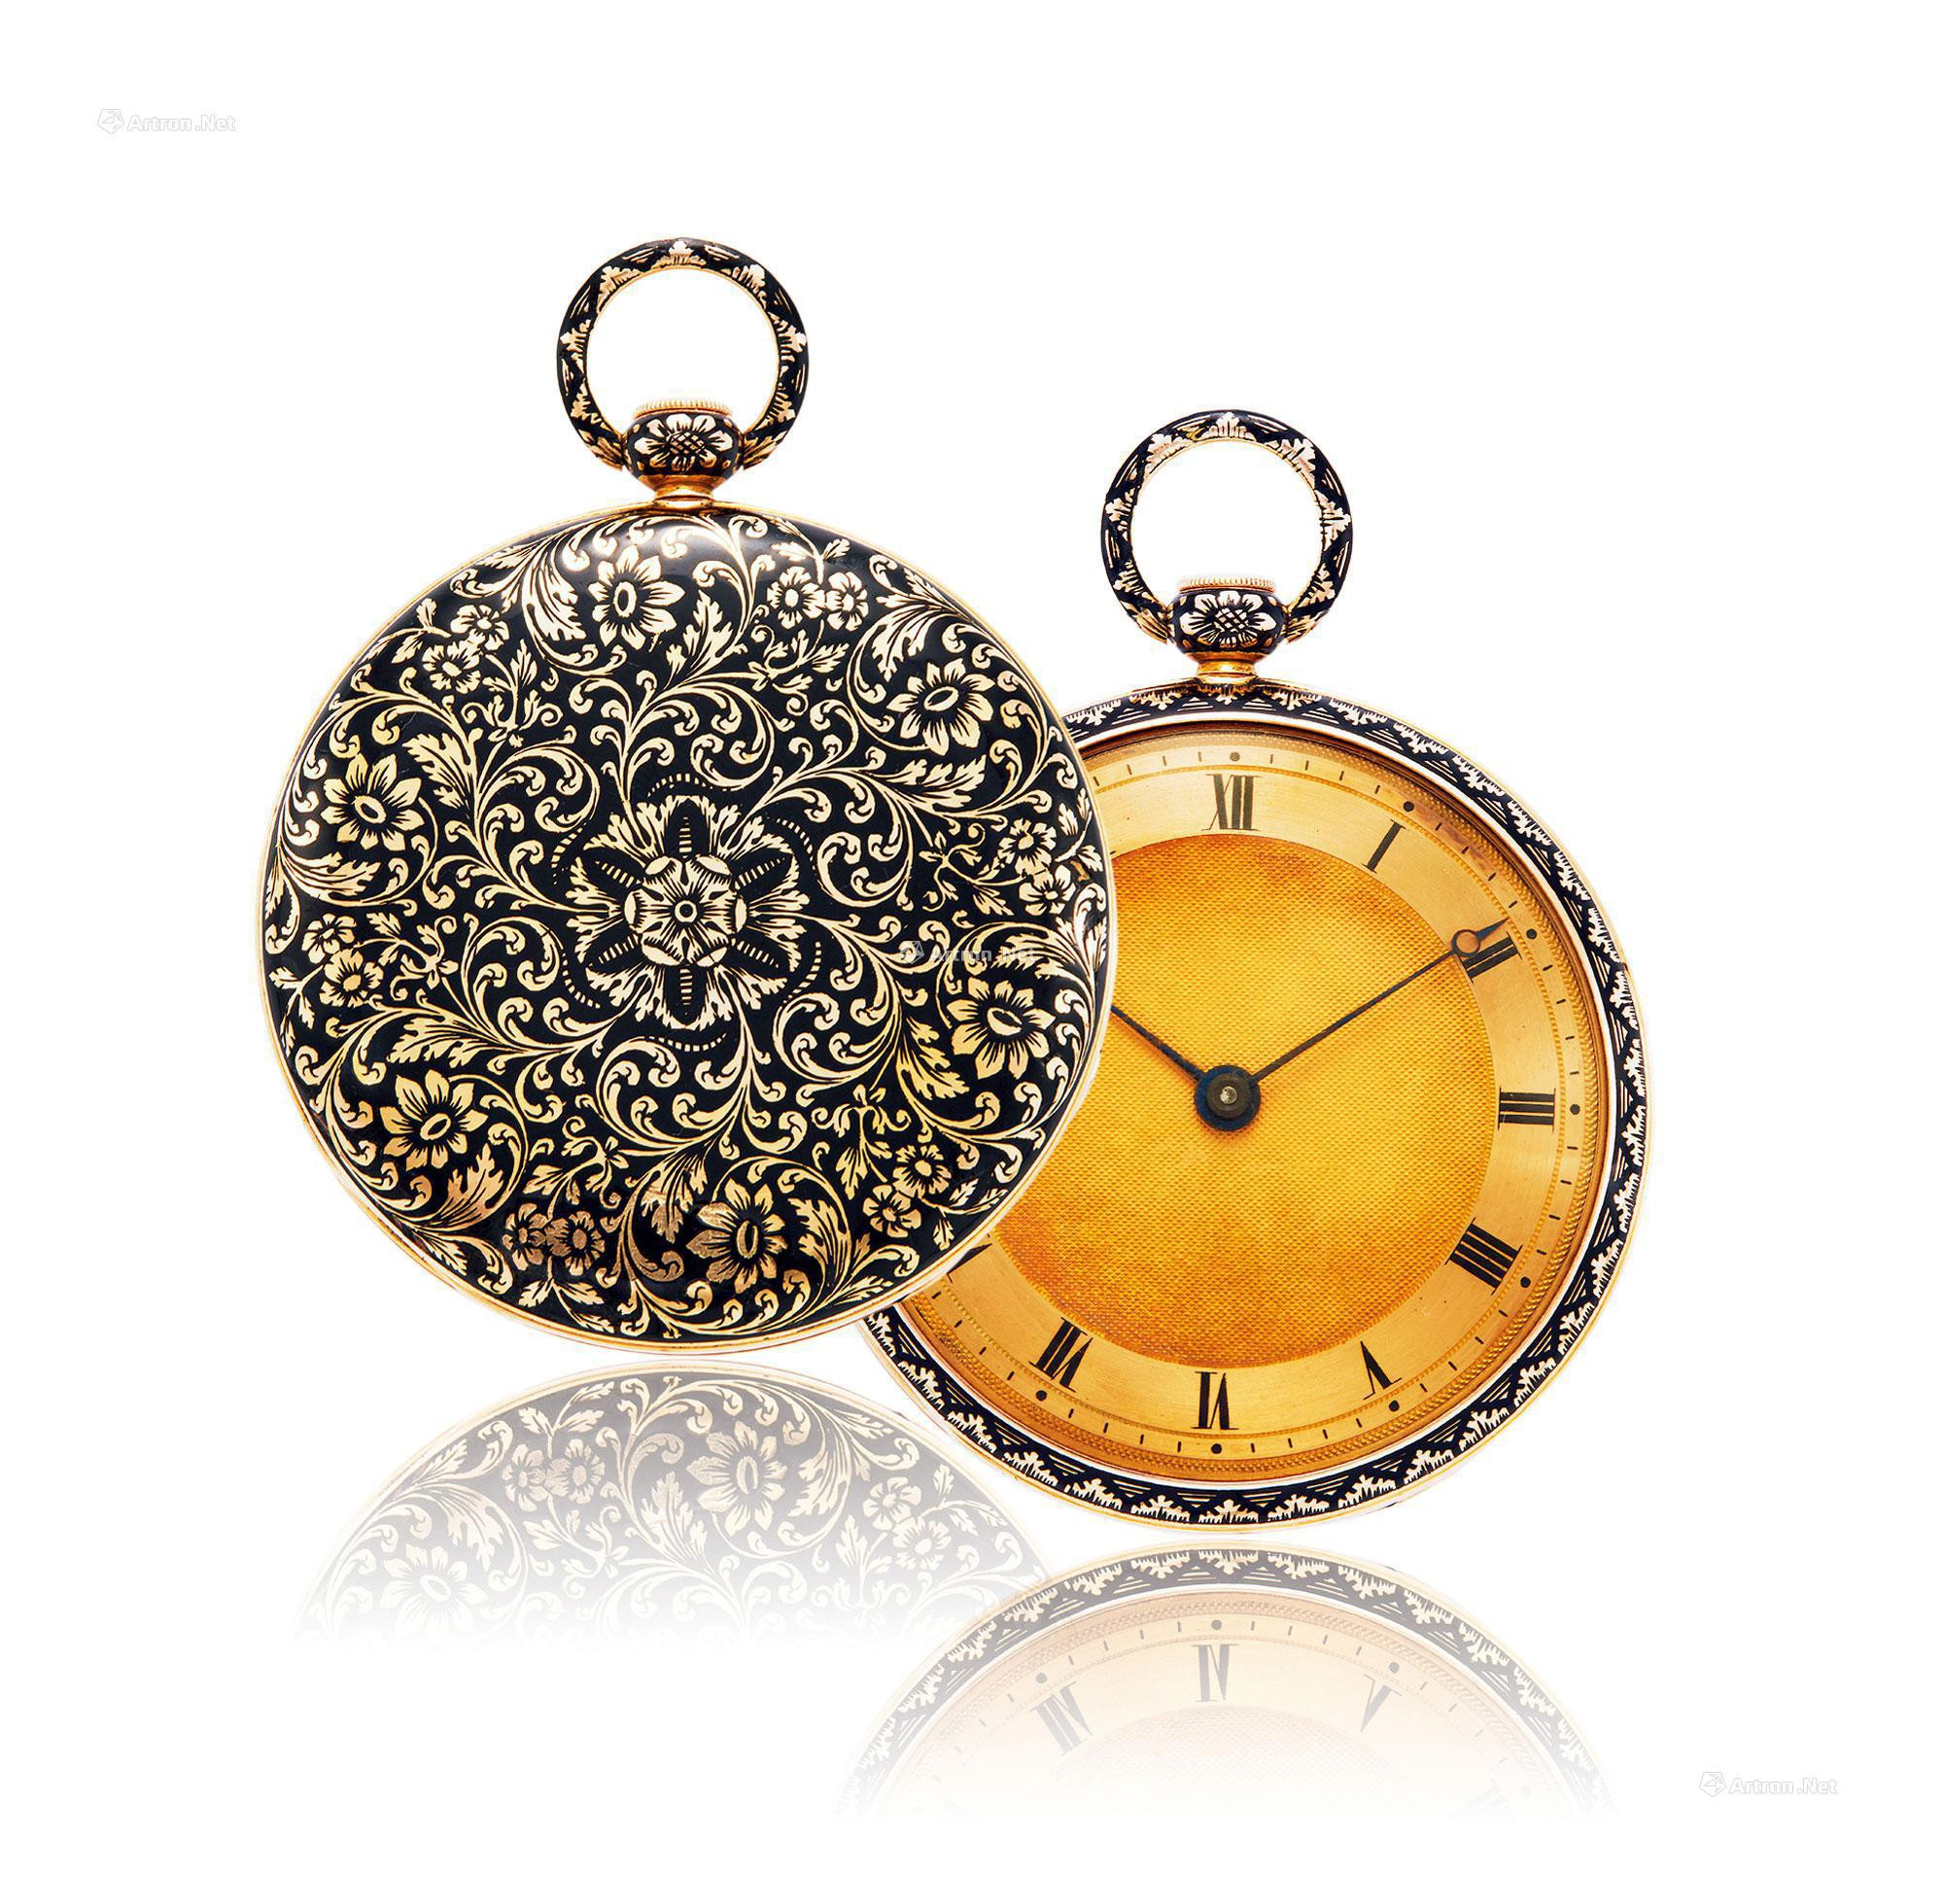 SWITZERLAND  A FINE YELLOW GOLD OPEN-FACED ENAMEL QUARTER REPEATING MECHANICAL POCKET WATCH